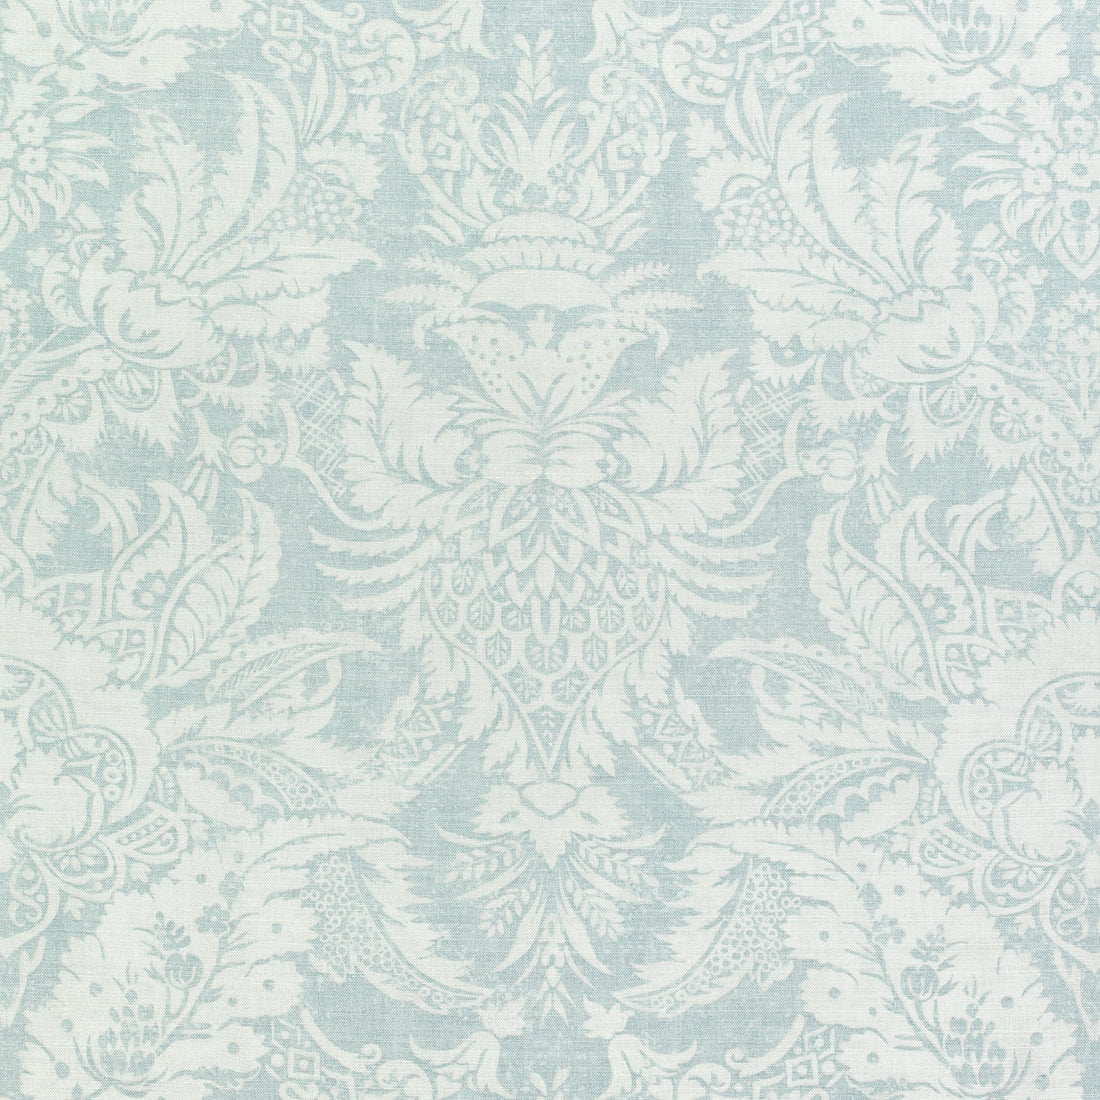 Chardonnet Damask fabric in aqua color - pattern number F972585 - by Thibaut in the Chestnut Hill collection